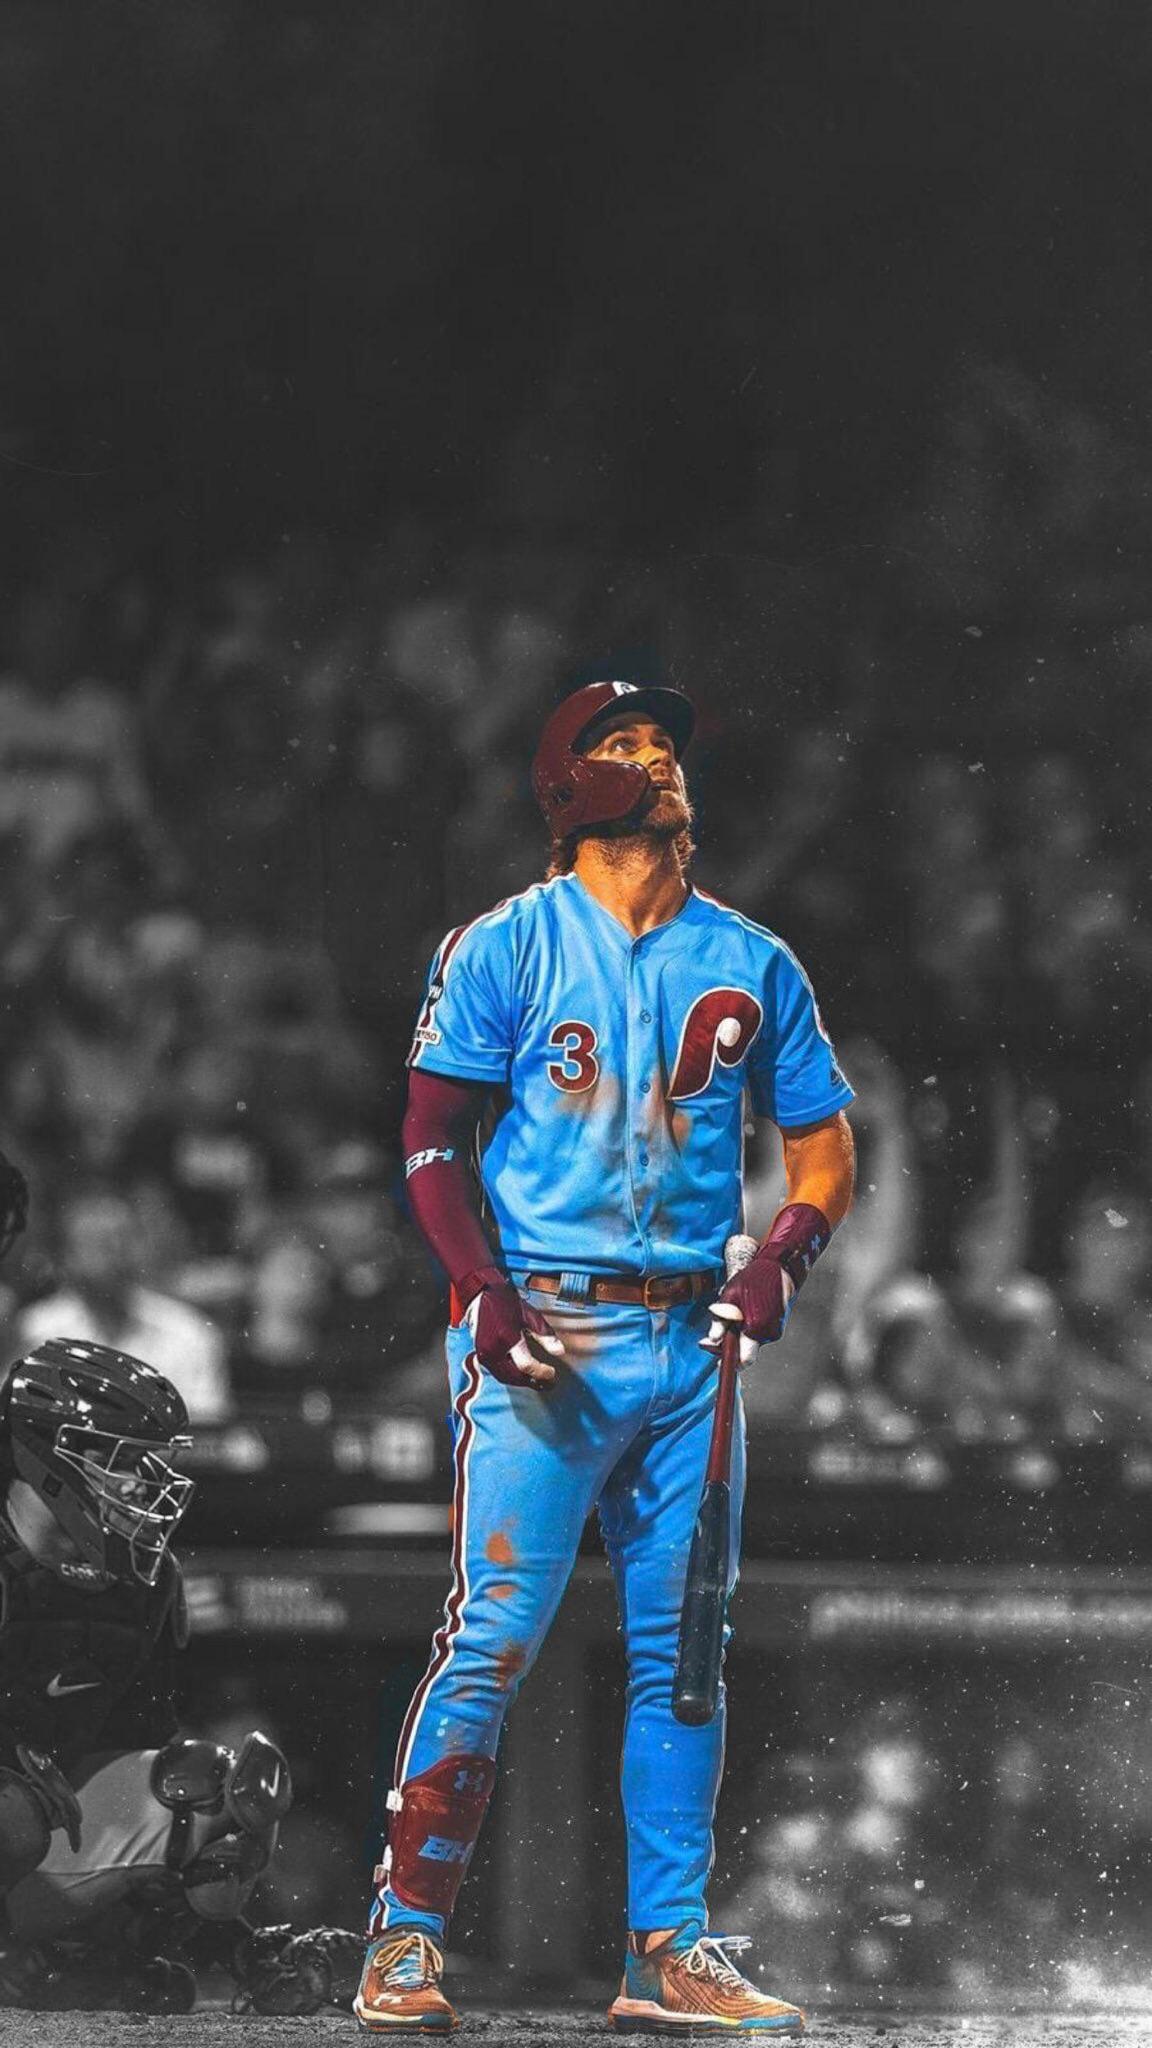 Free download An slight edit to the wallpaper made of Bryce Harper